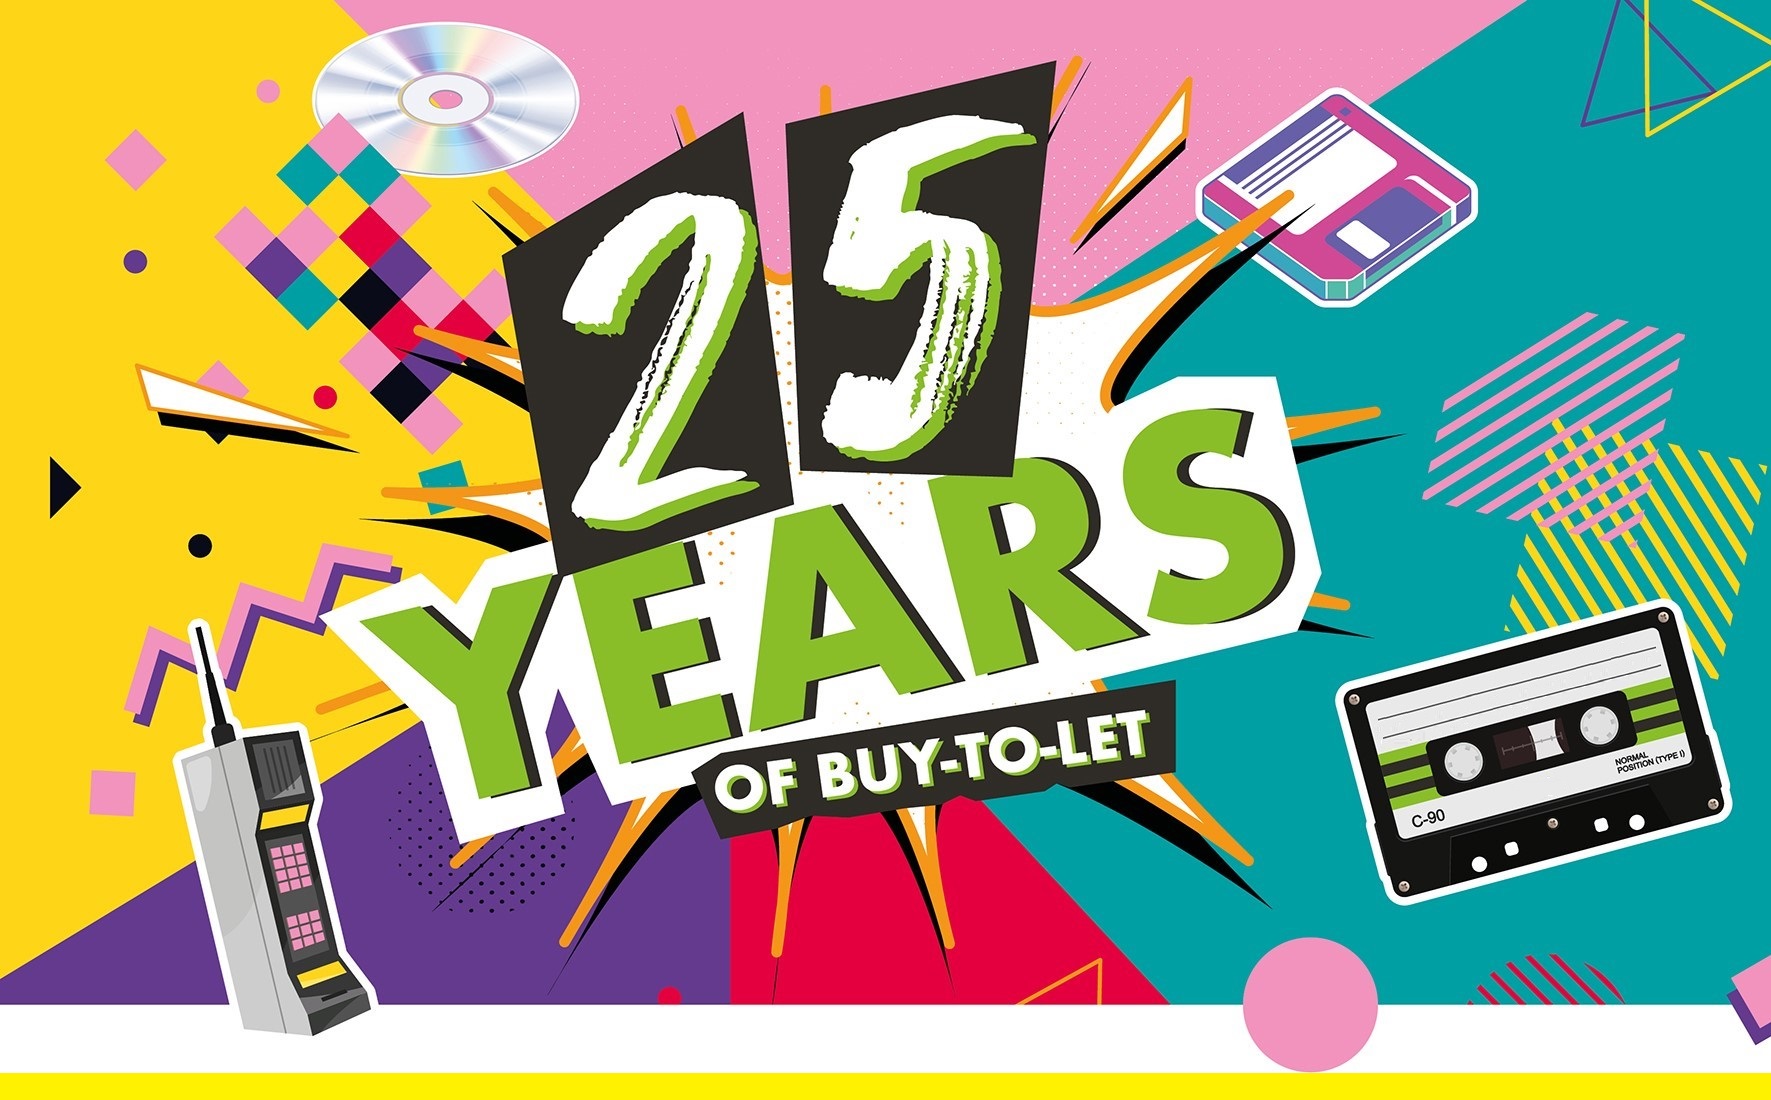 25 YEARS OF BUY-TO-LET